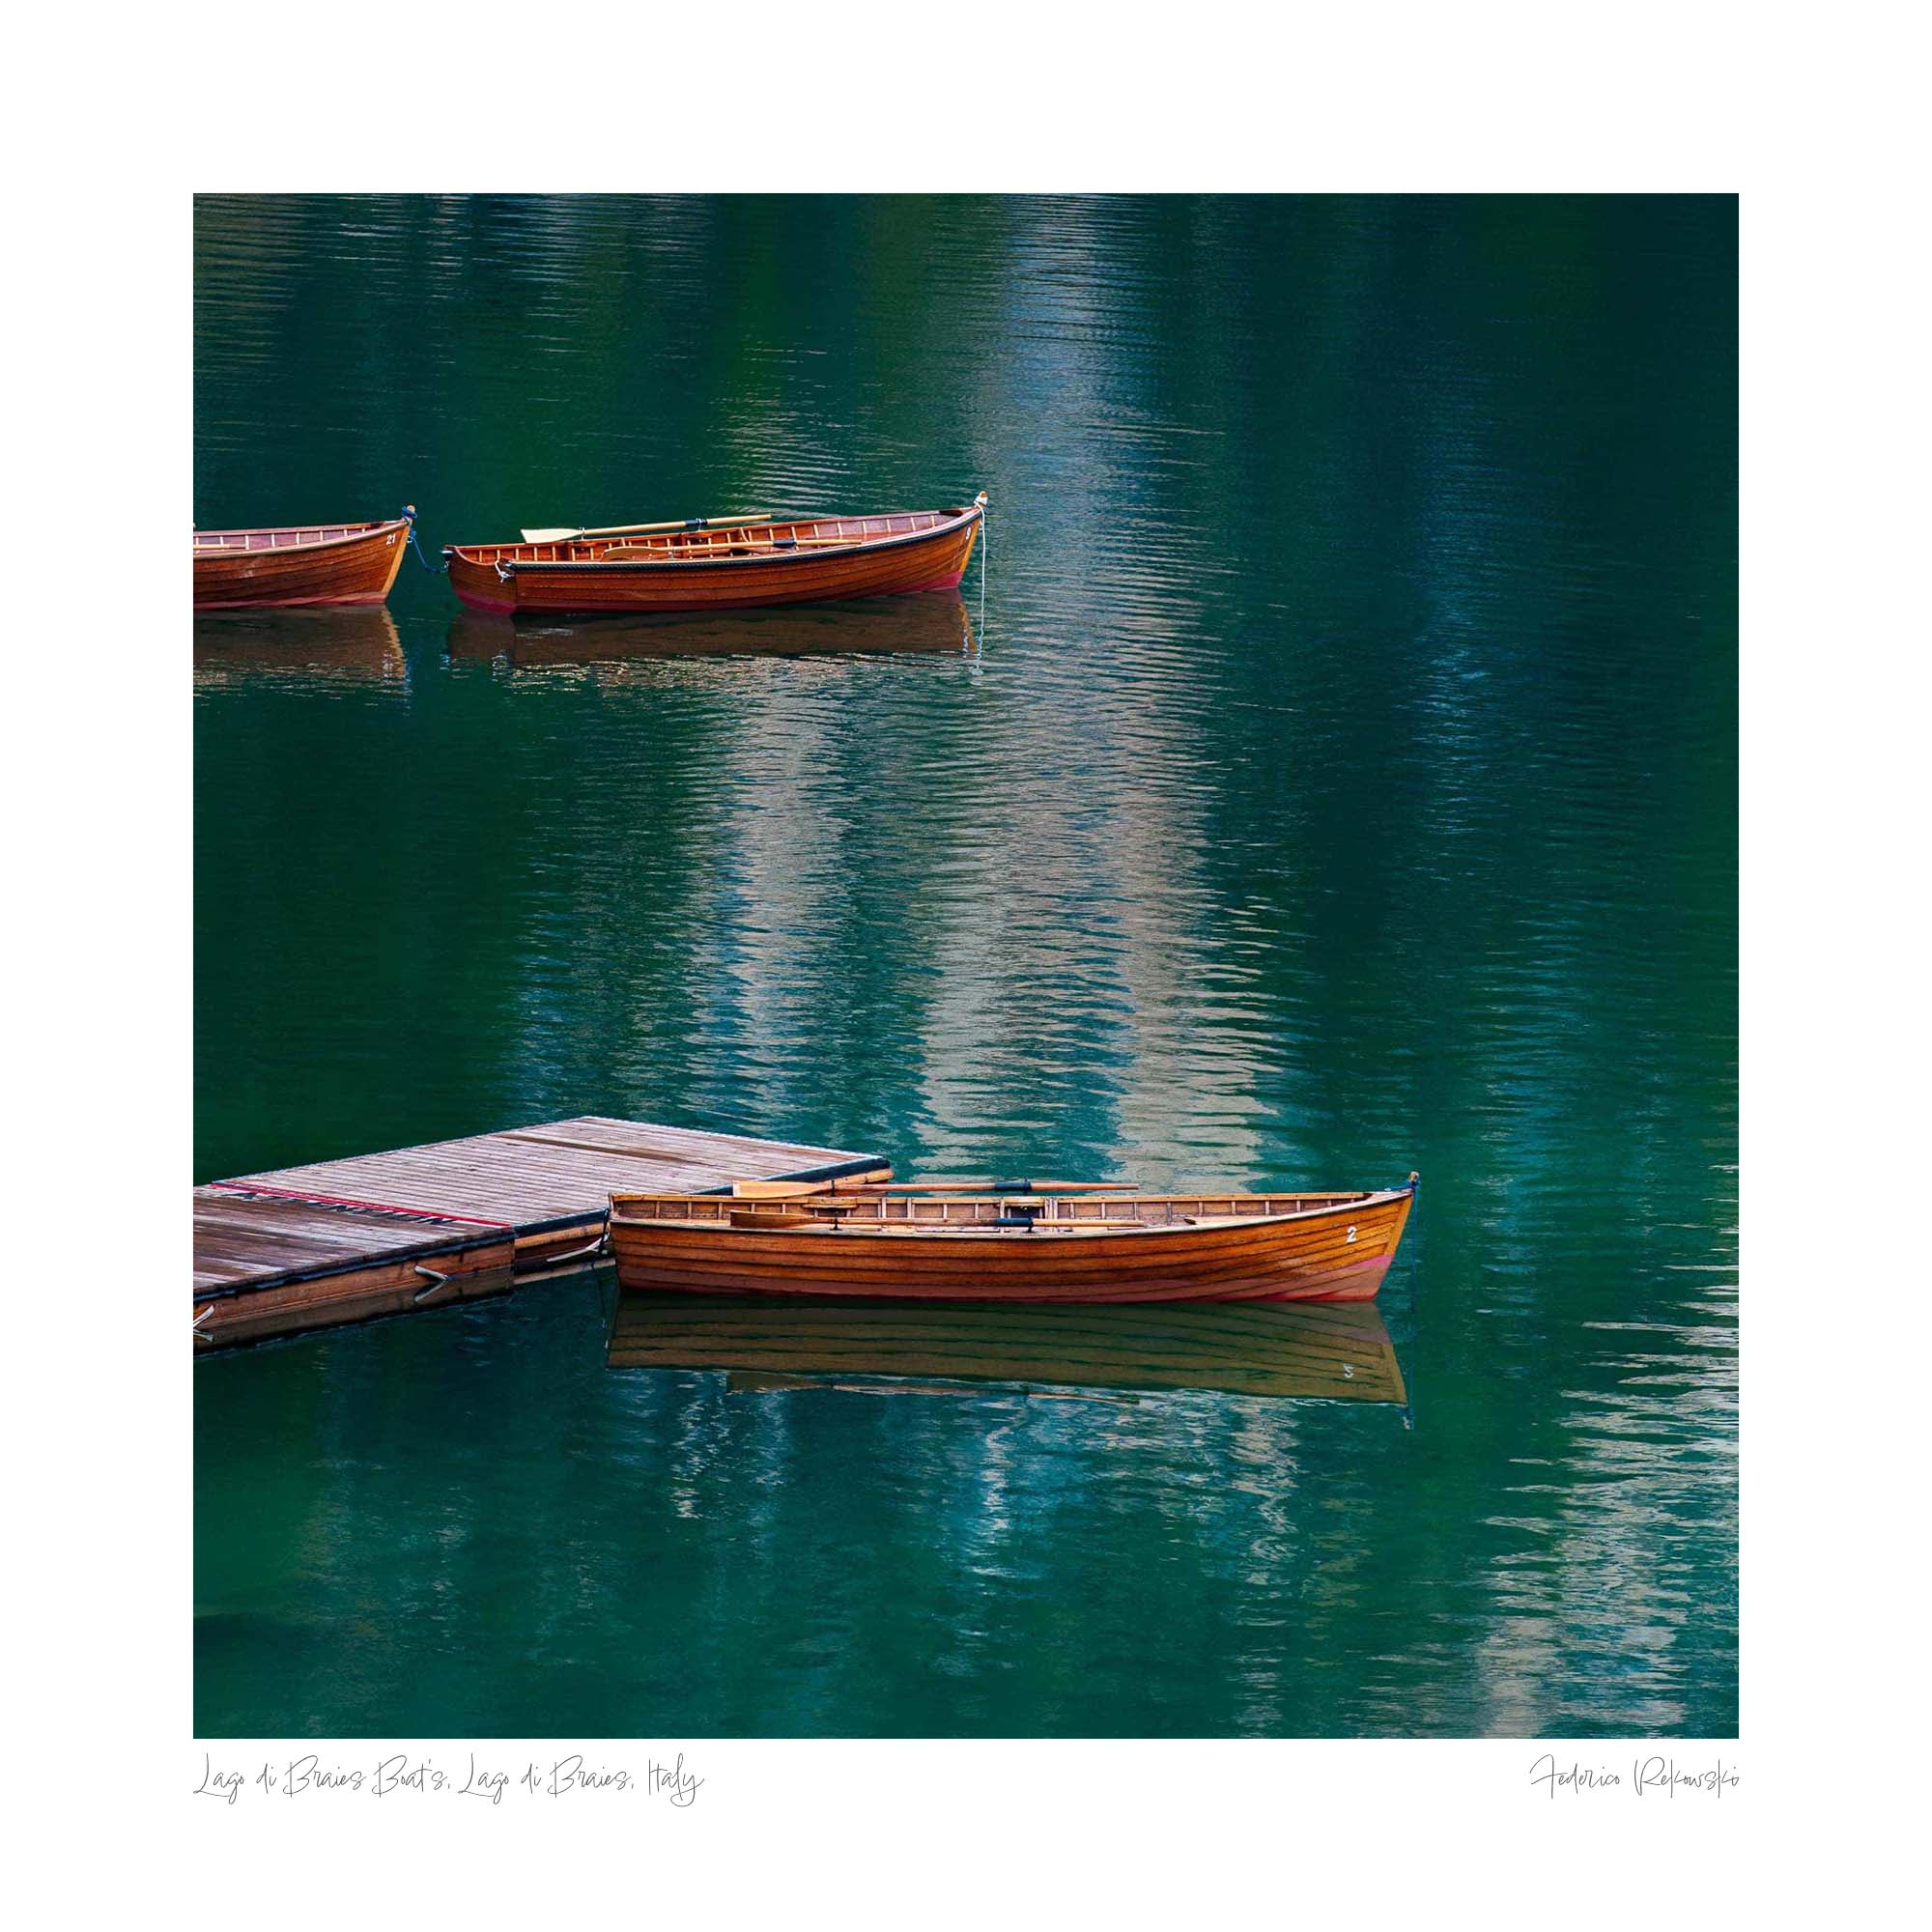 Three wooden boats floating gently on the crystal-clear waters of Lago di Braies in the Dolomites, Italy.